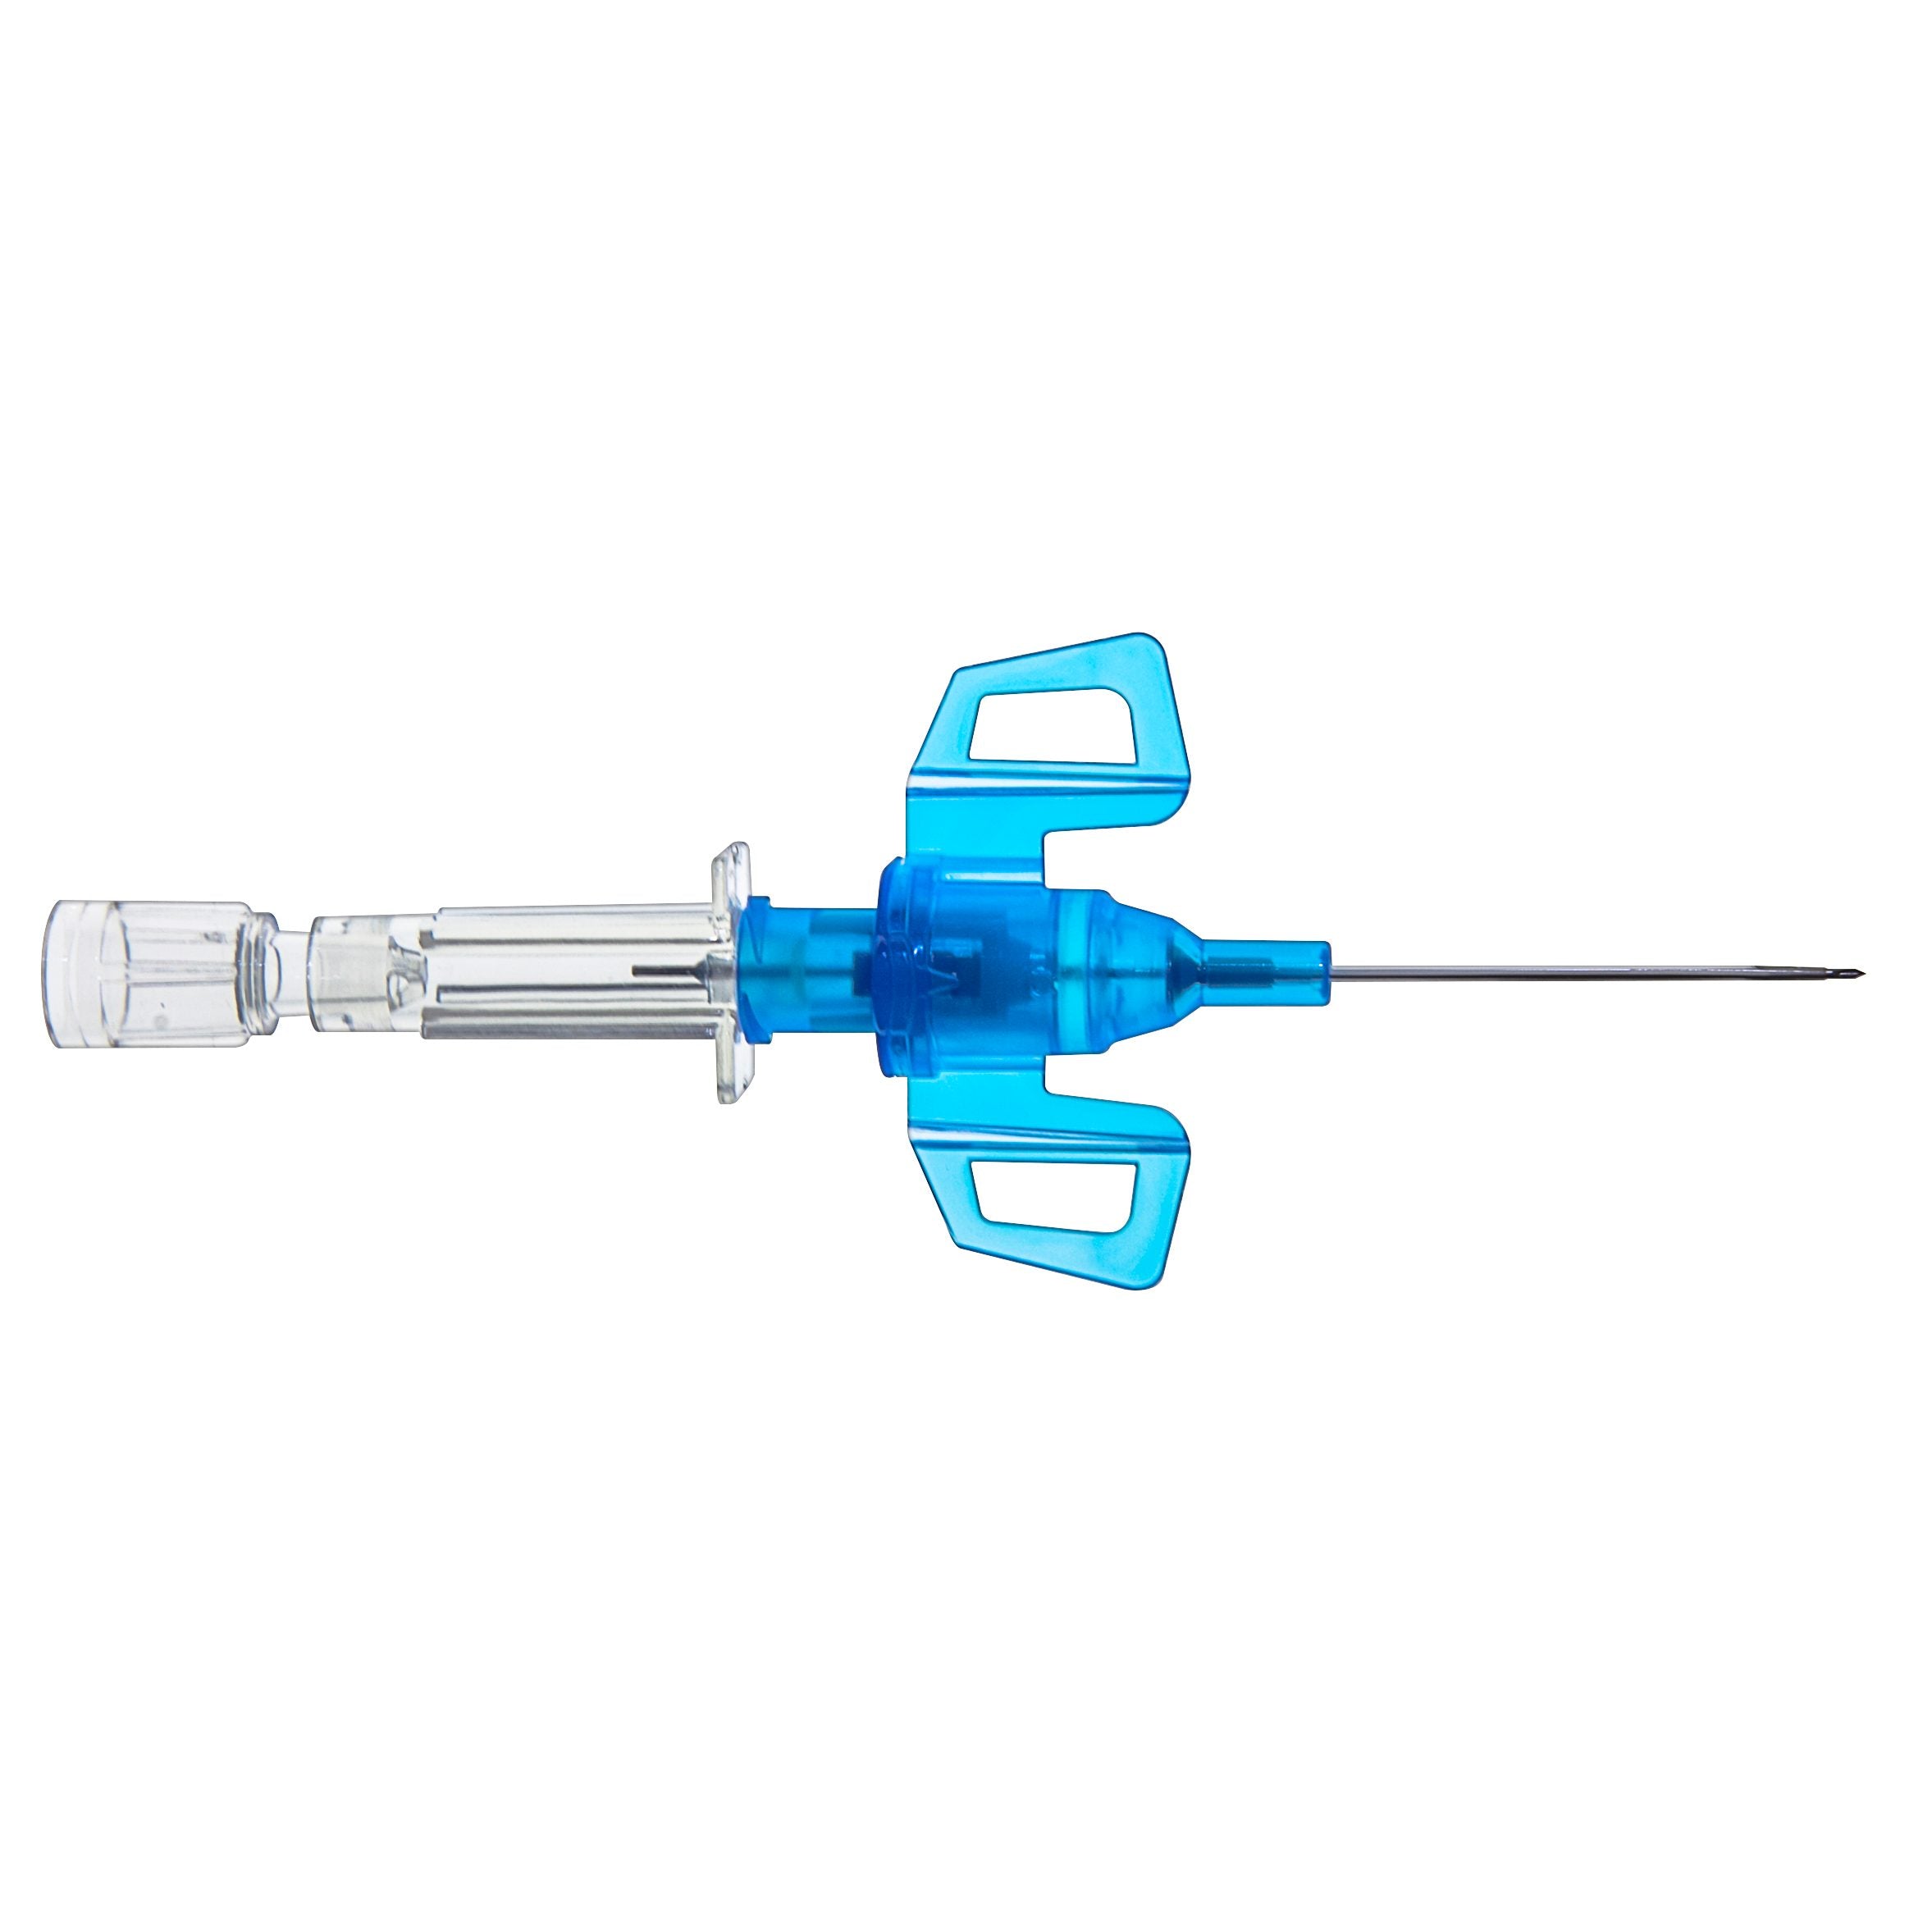 Introcan-Safety-3 Closed-IV-Catheter-22 G